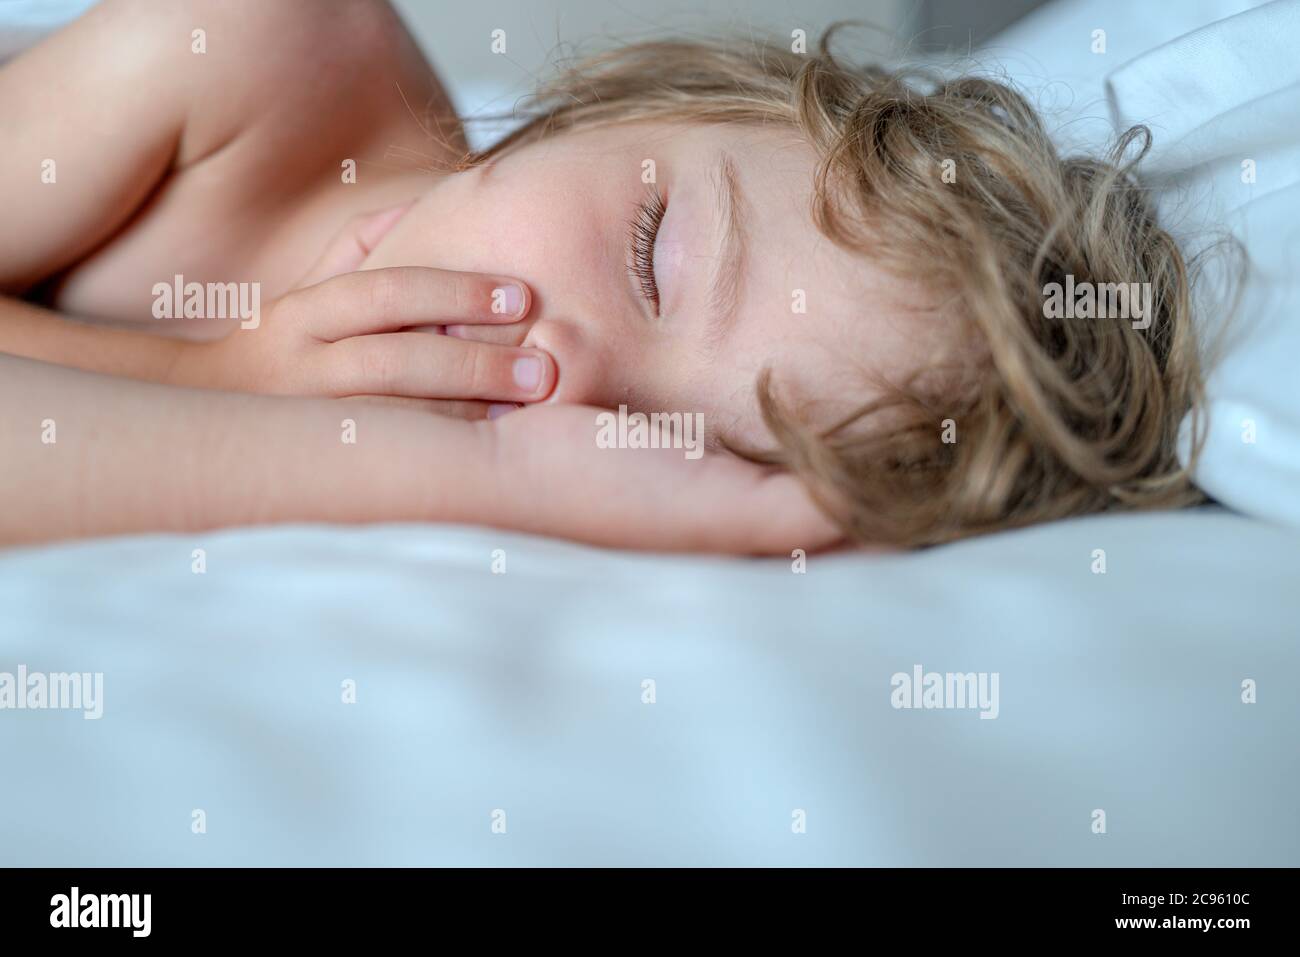 Little kids sleeping with her mouth open, snoring. Kid in bedroom sleep on bed with white sheet and pillow. Stock Photo